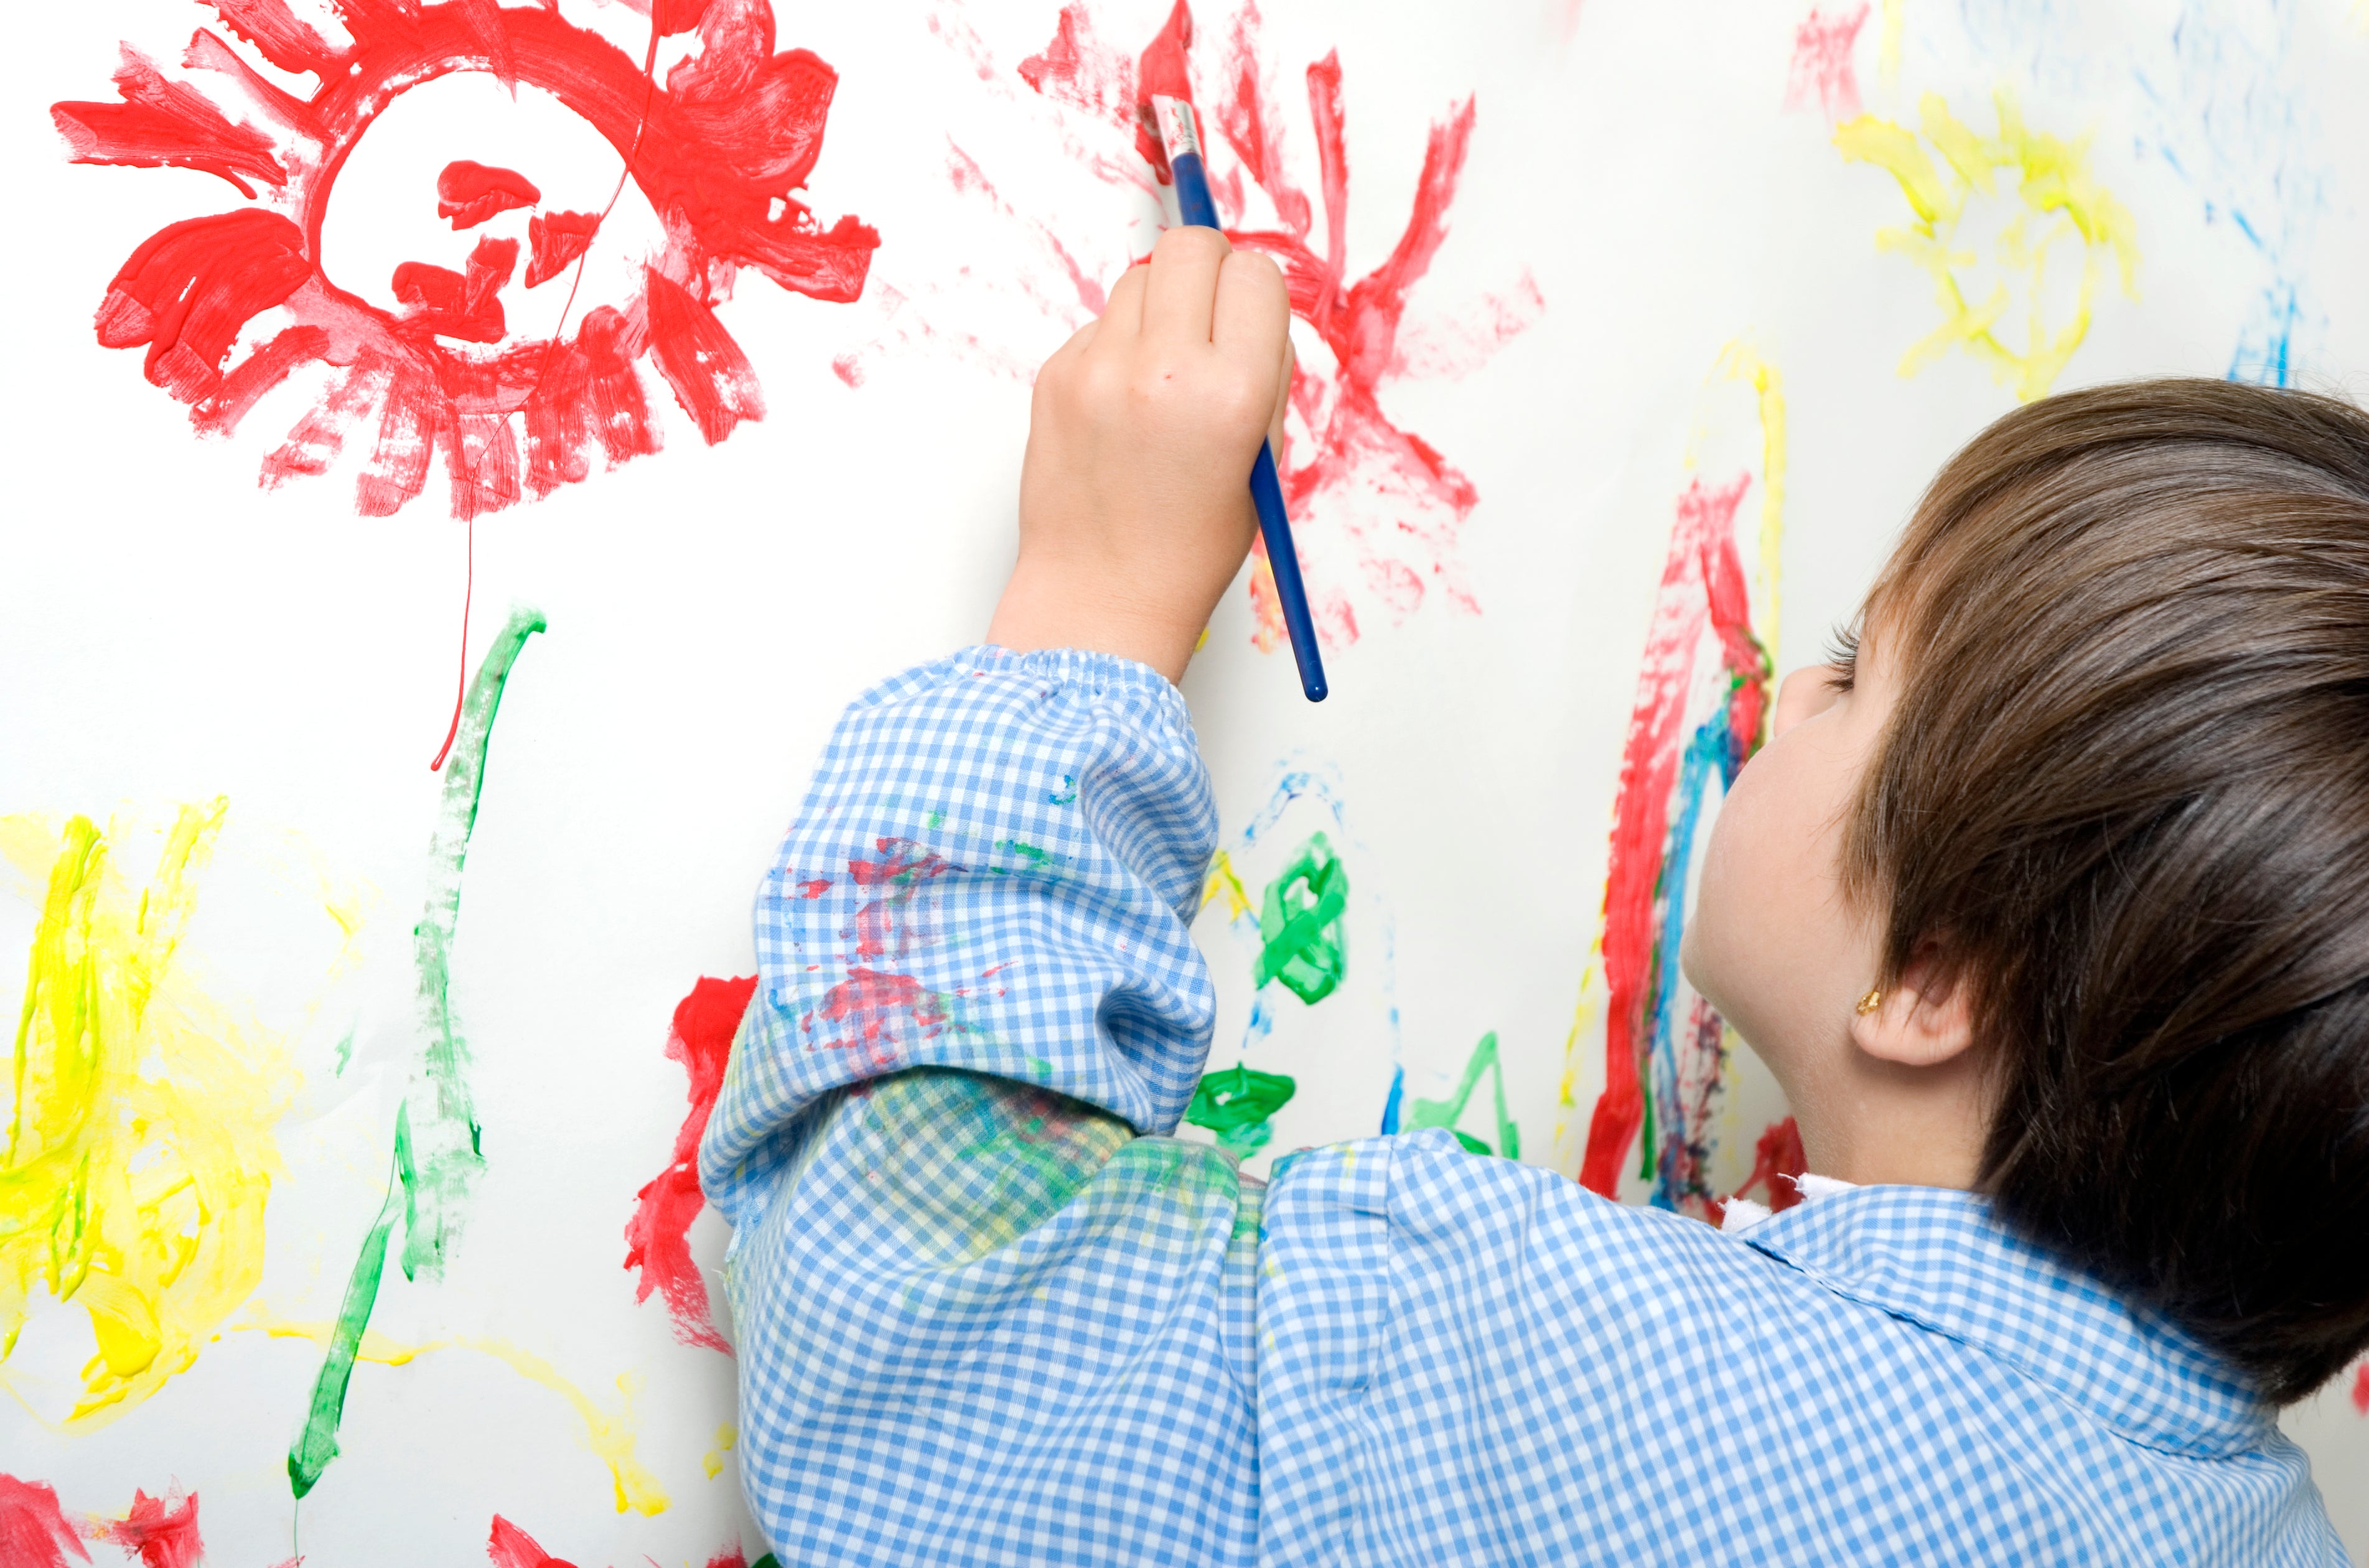 Left handed child painting